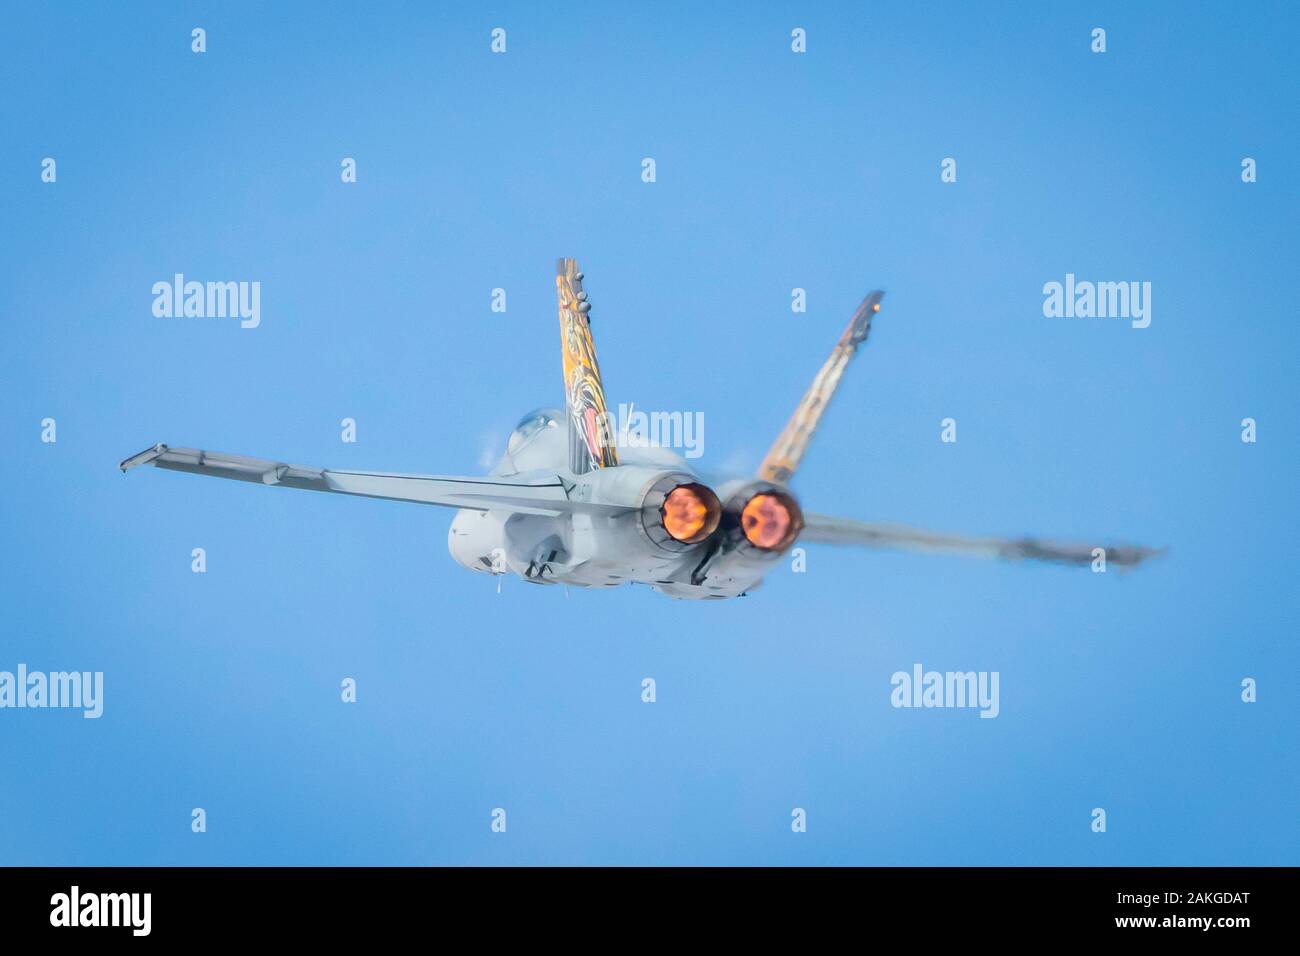 Fairford, Gloucestershire, UK - July 20th, 2019: Swiss Air Force Mcdonnell Douglas F/A-18 Hornet performing its Aerobatic Display at Fairford Internat Stock Photo